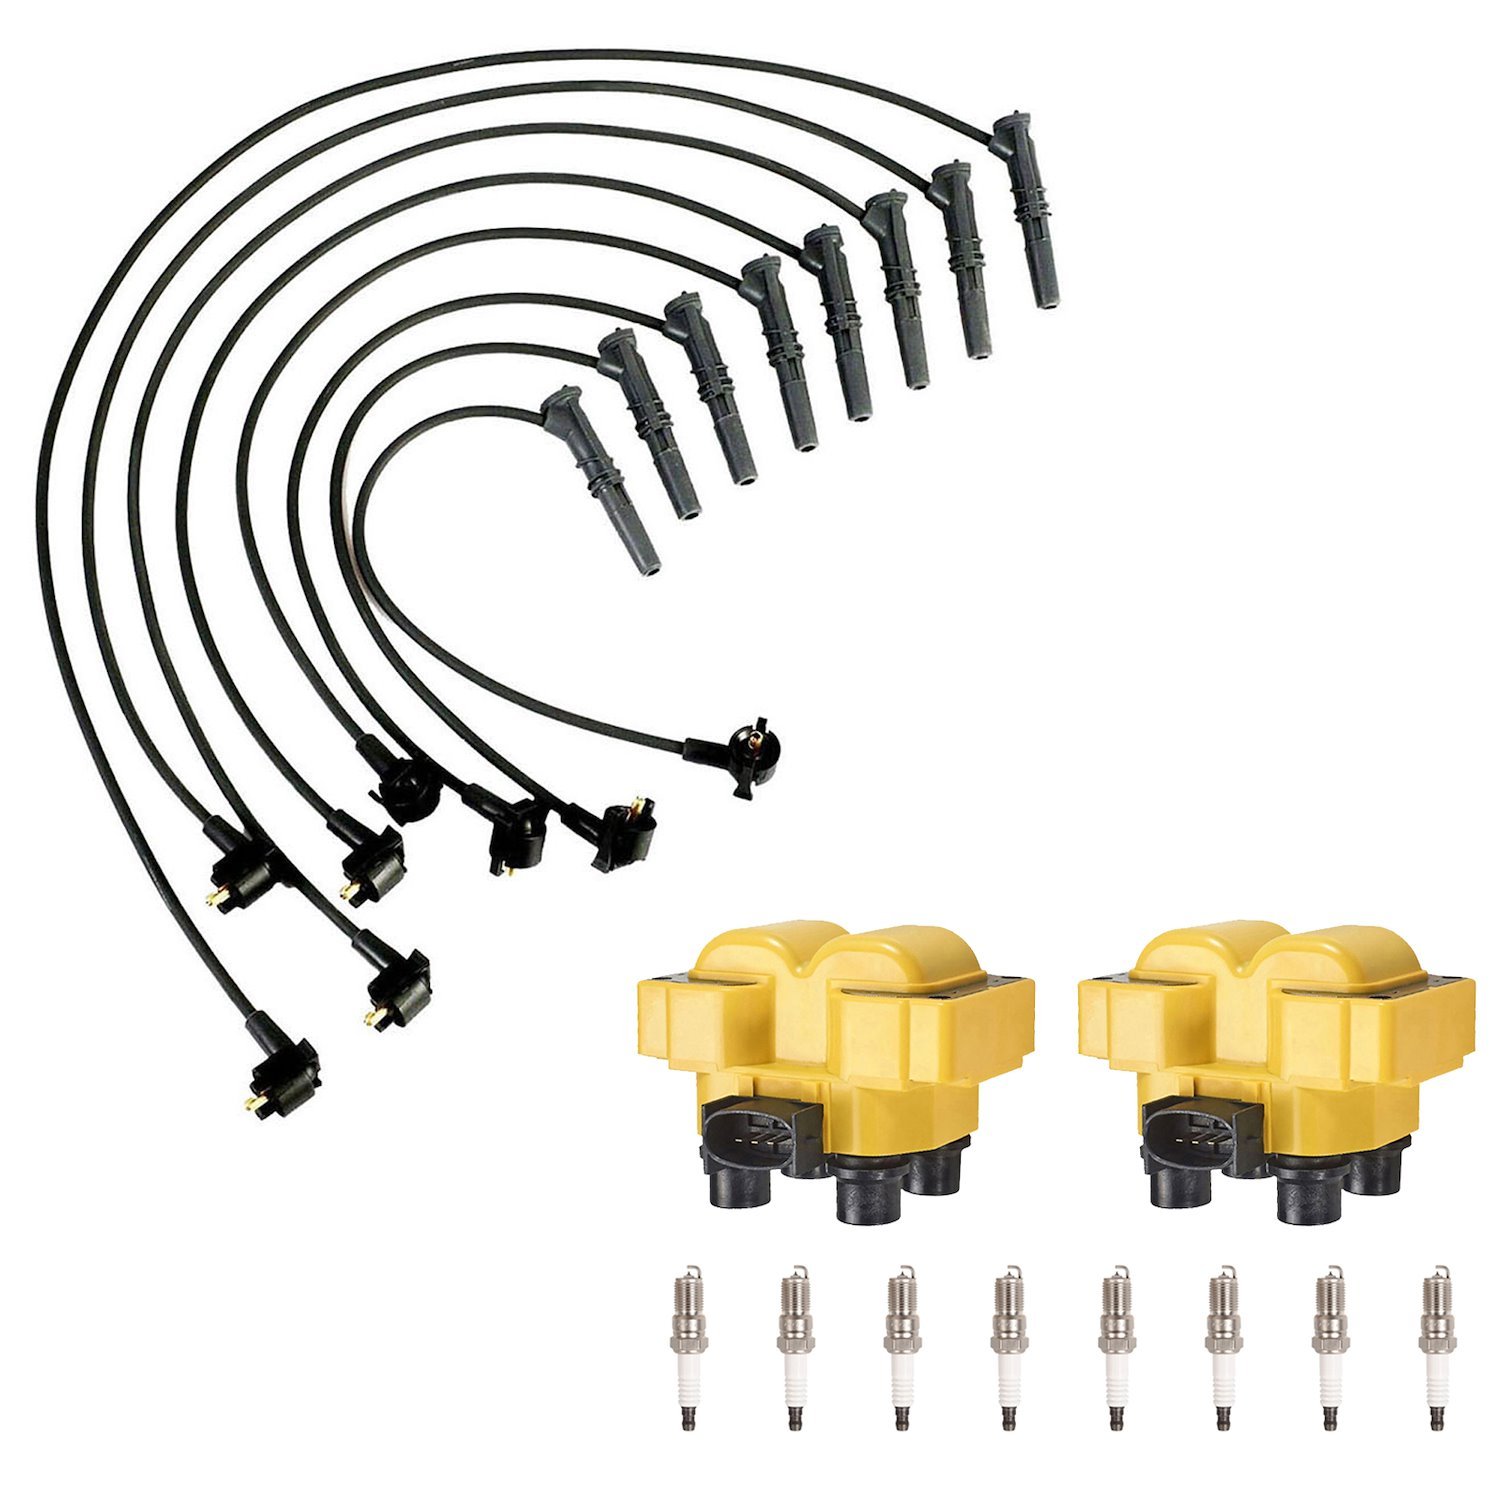 High-Performance Ignition Coil, Spark Plug, and Spark Plug Wire Kit for Ford F-150/F-250, Lincoln Mercury